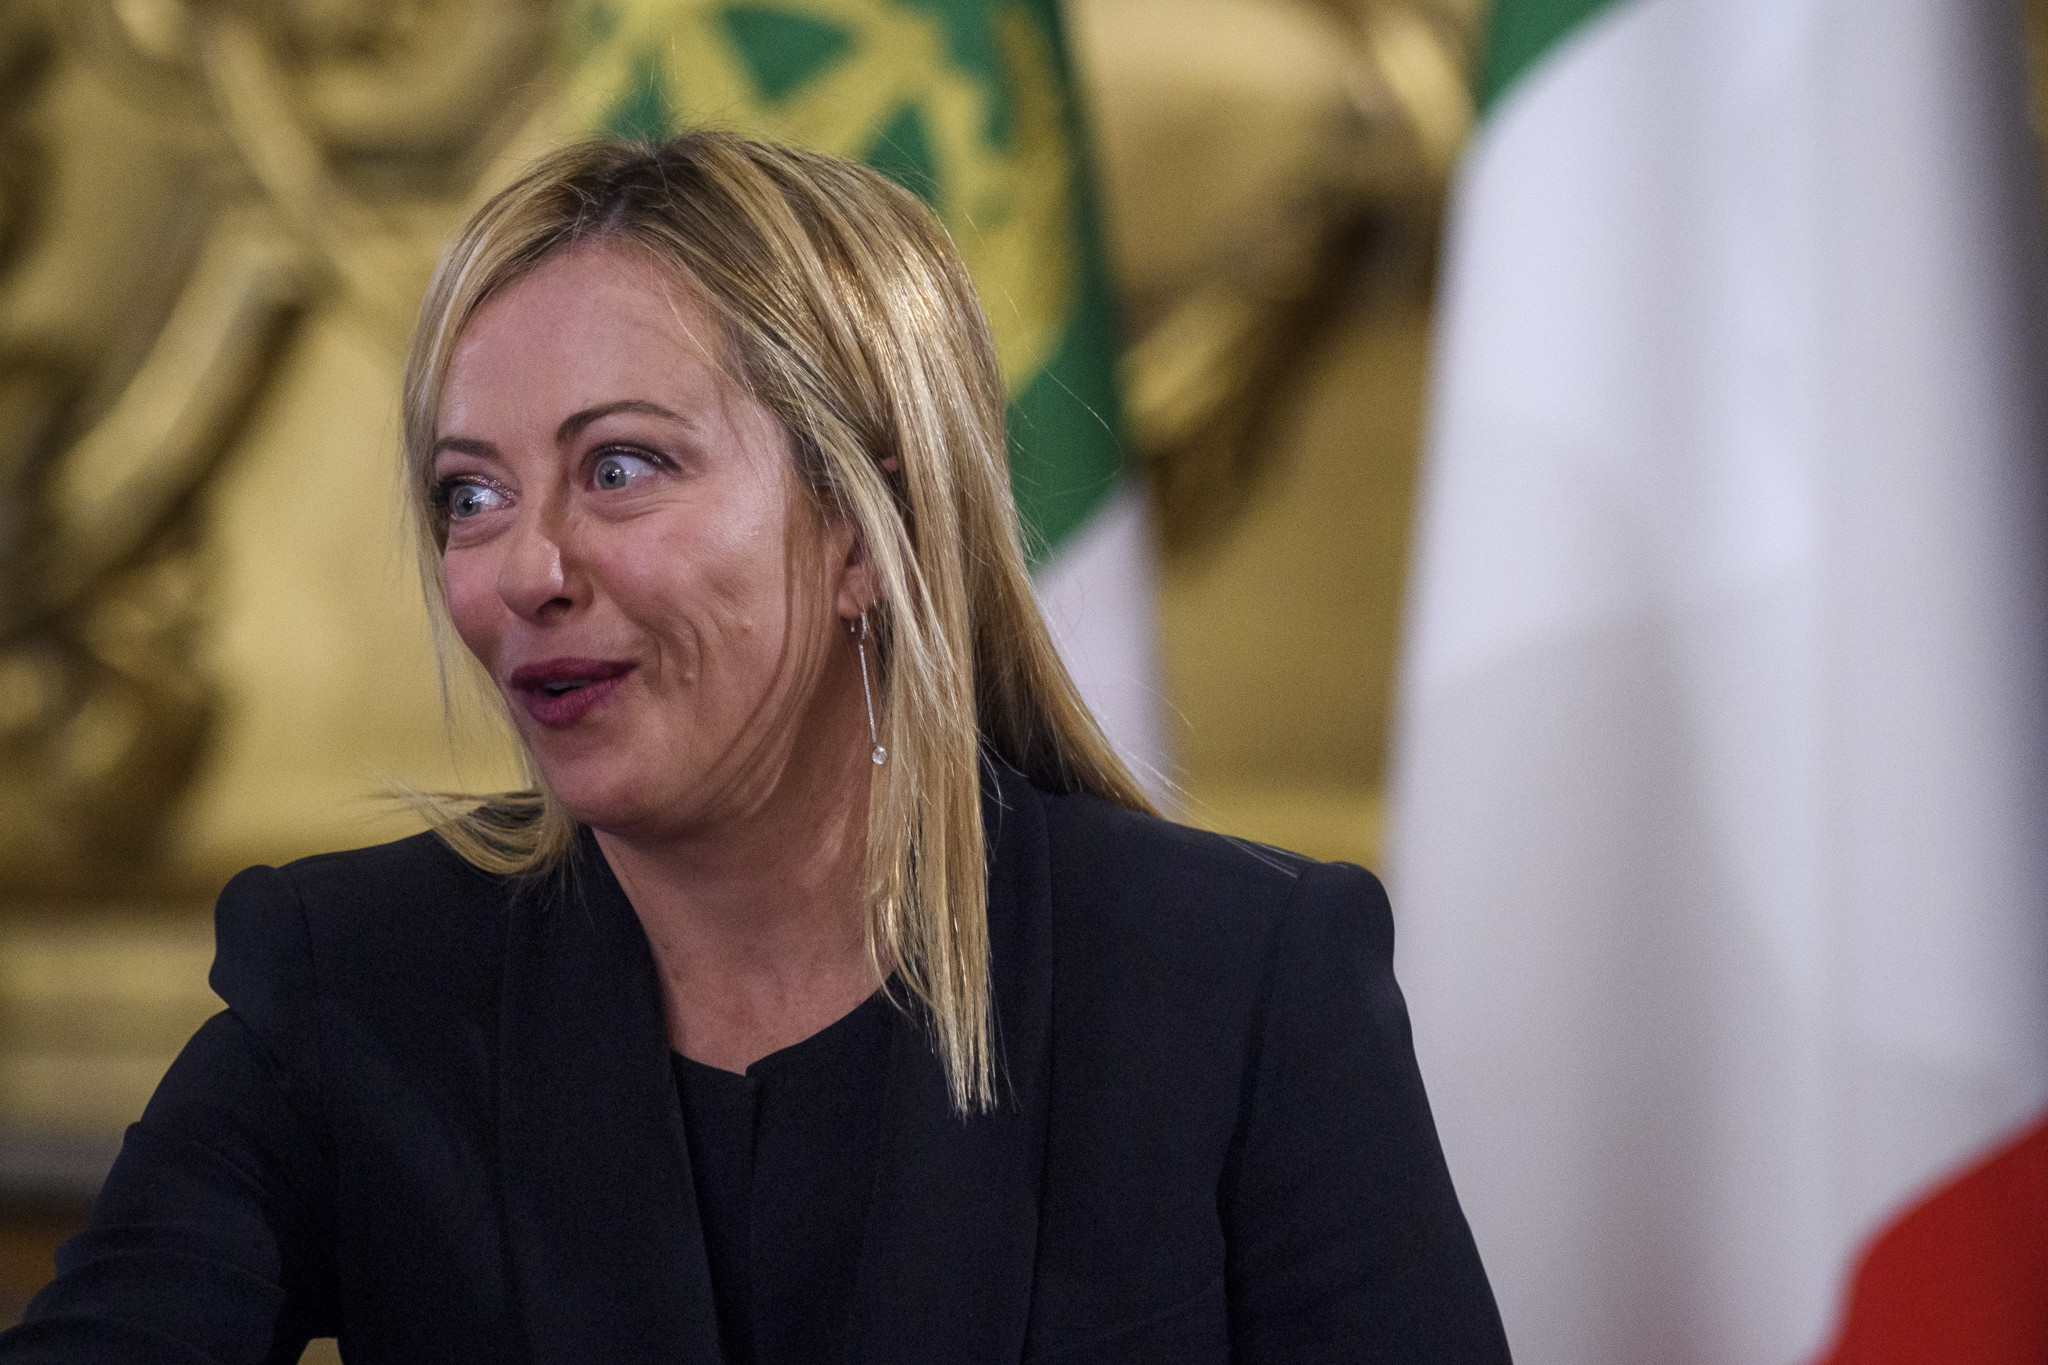 Italian Prime Minister Giorgia Meloni will be advised by Andrea Abodi but will make the final decision on who will serve as Milan Cortina 2026 chief executive ©Getty Images